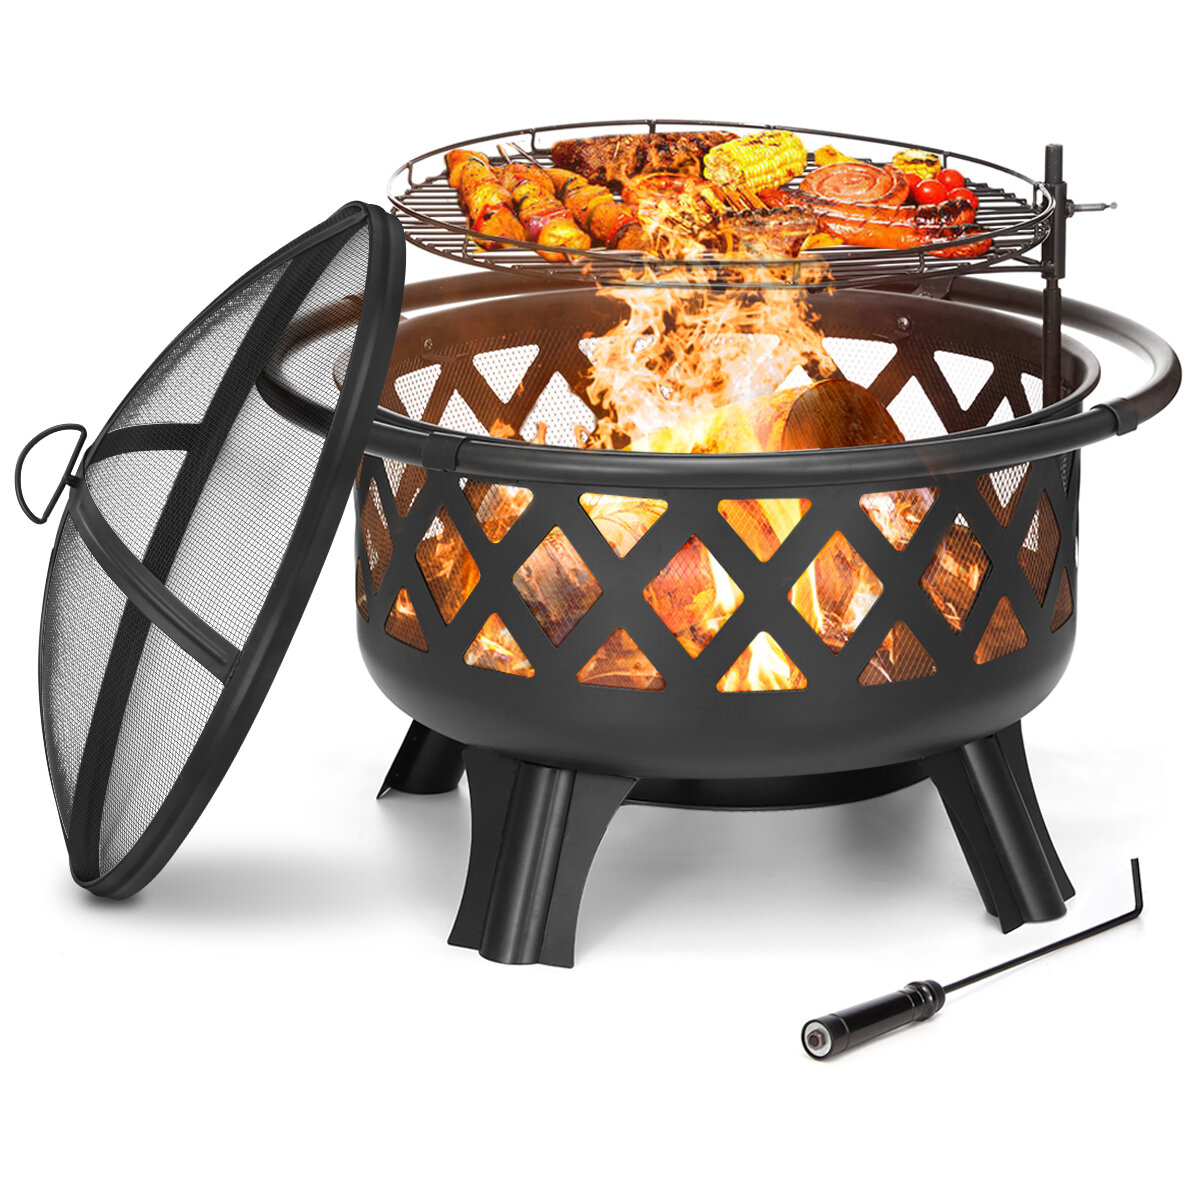 30 Inch Large Fire Pits Wood Burning Steel Firepit with Swivel BBQ Grill Ash Plate Spark Screen Poker